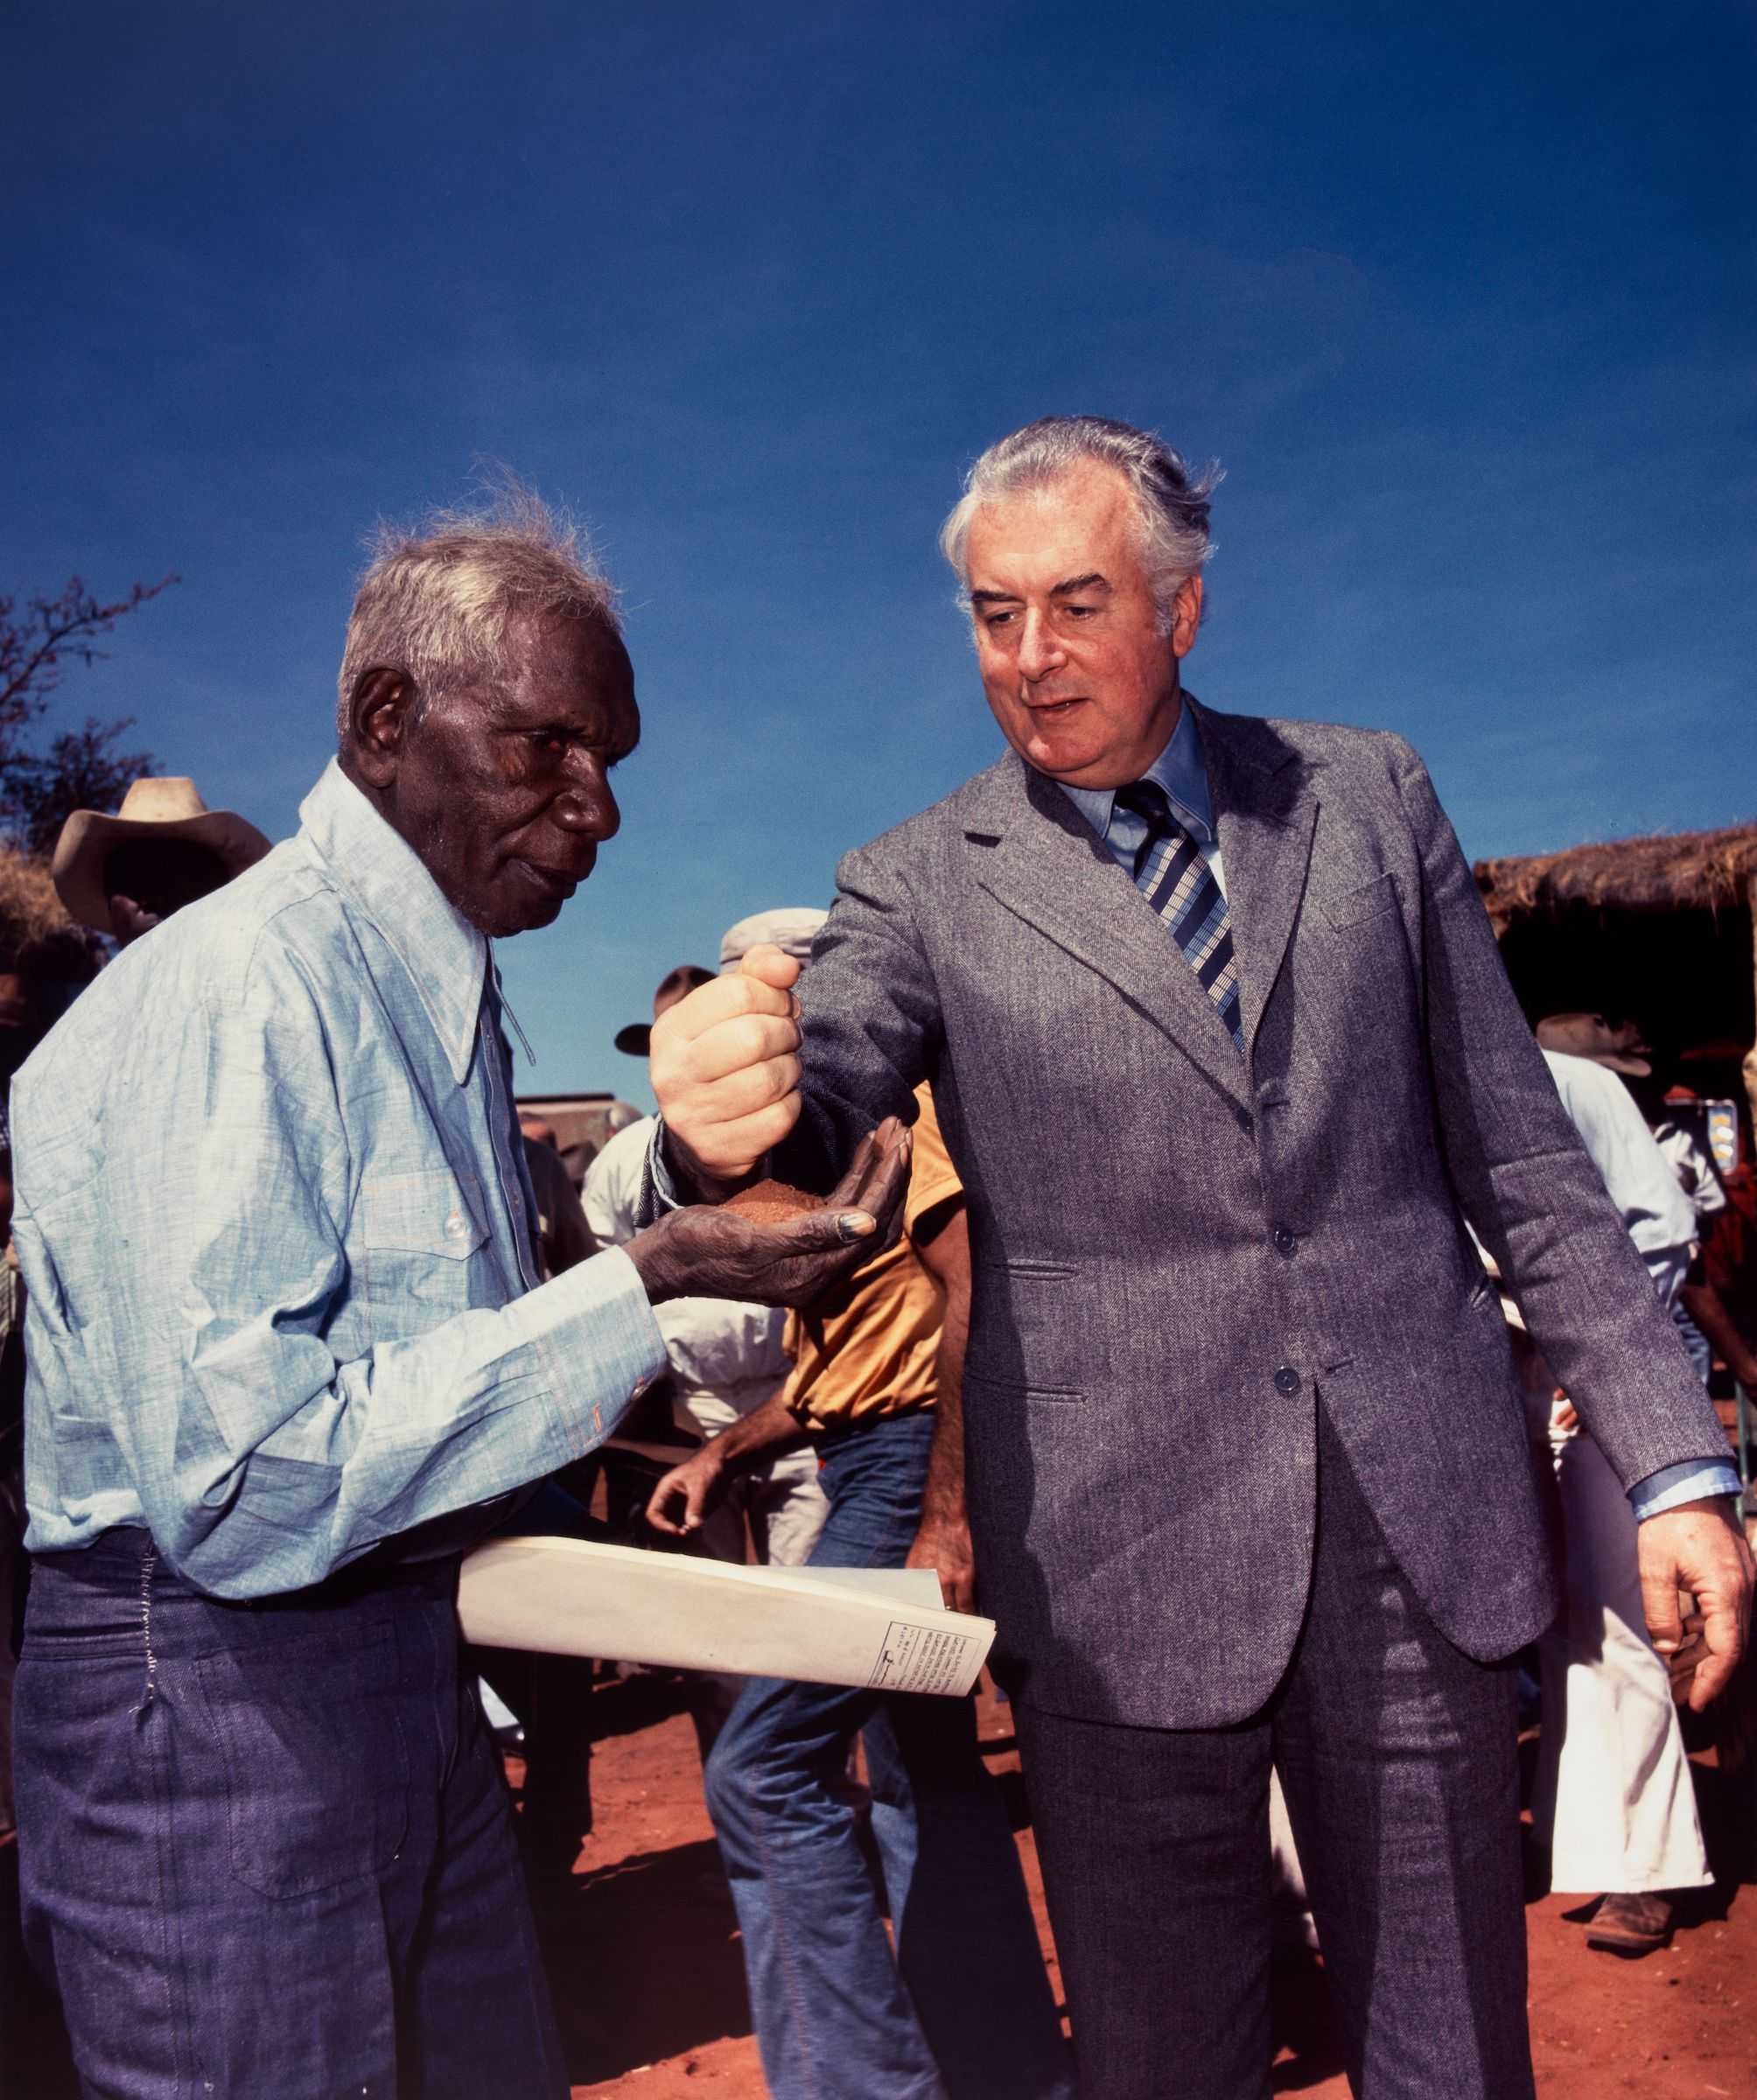 Prime Minister Gough Whitlam pours soil into the hand of traditional land owner Vincent Lingiari